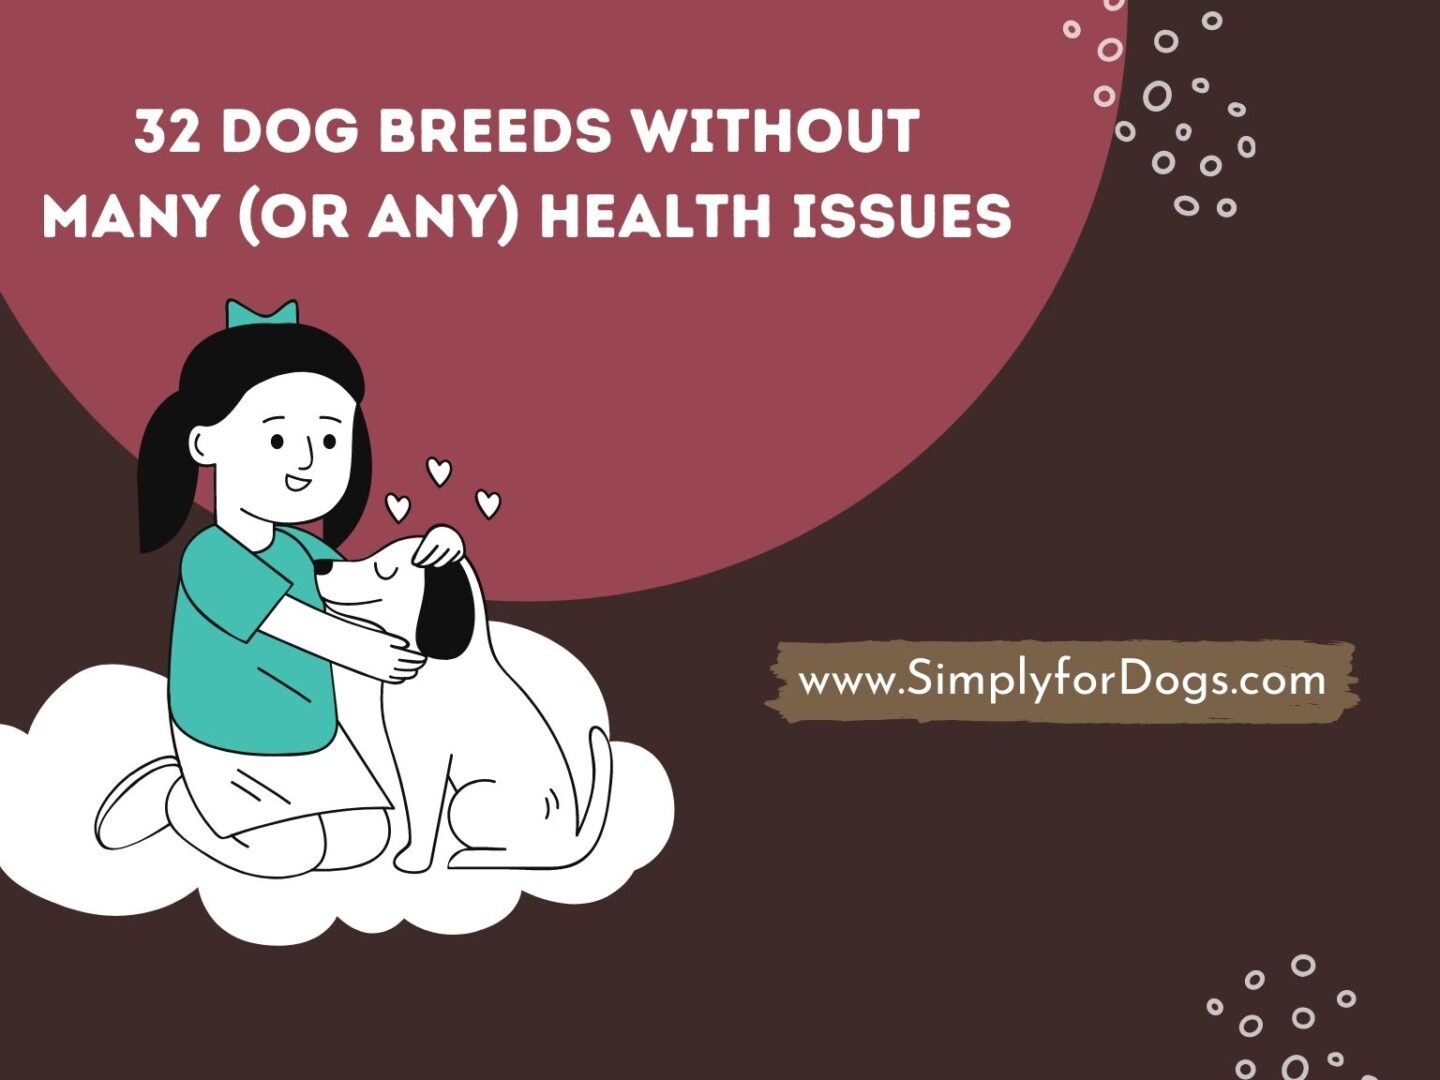 32 Dog Breeds Without Many (or Any) Health Issues